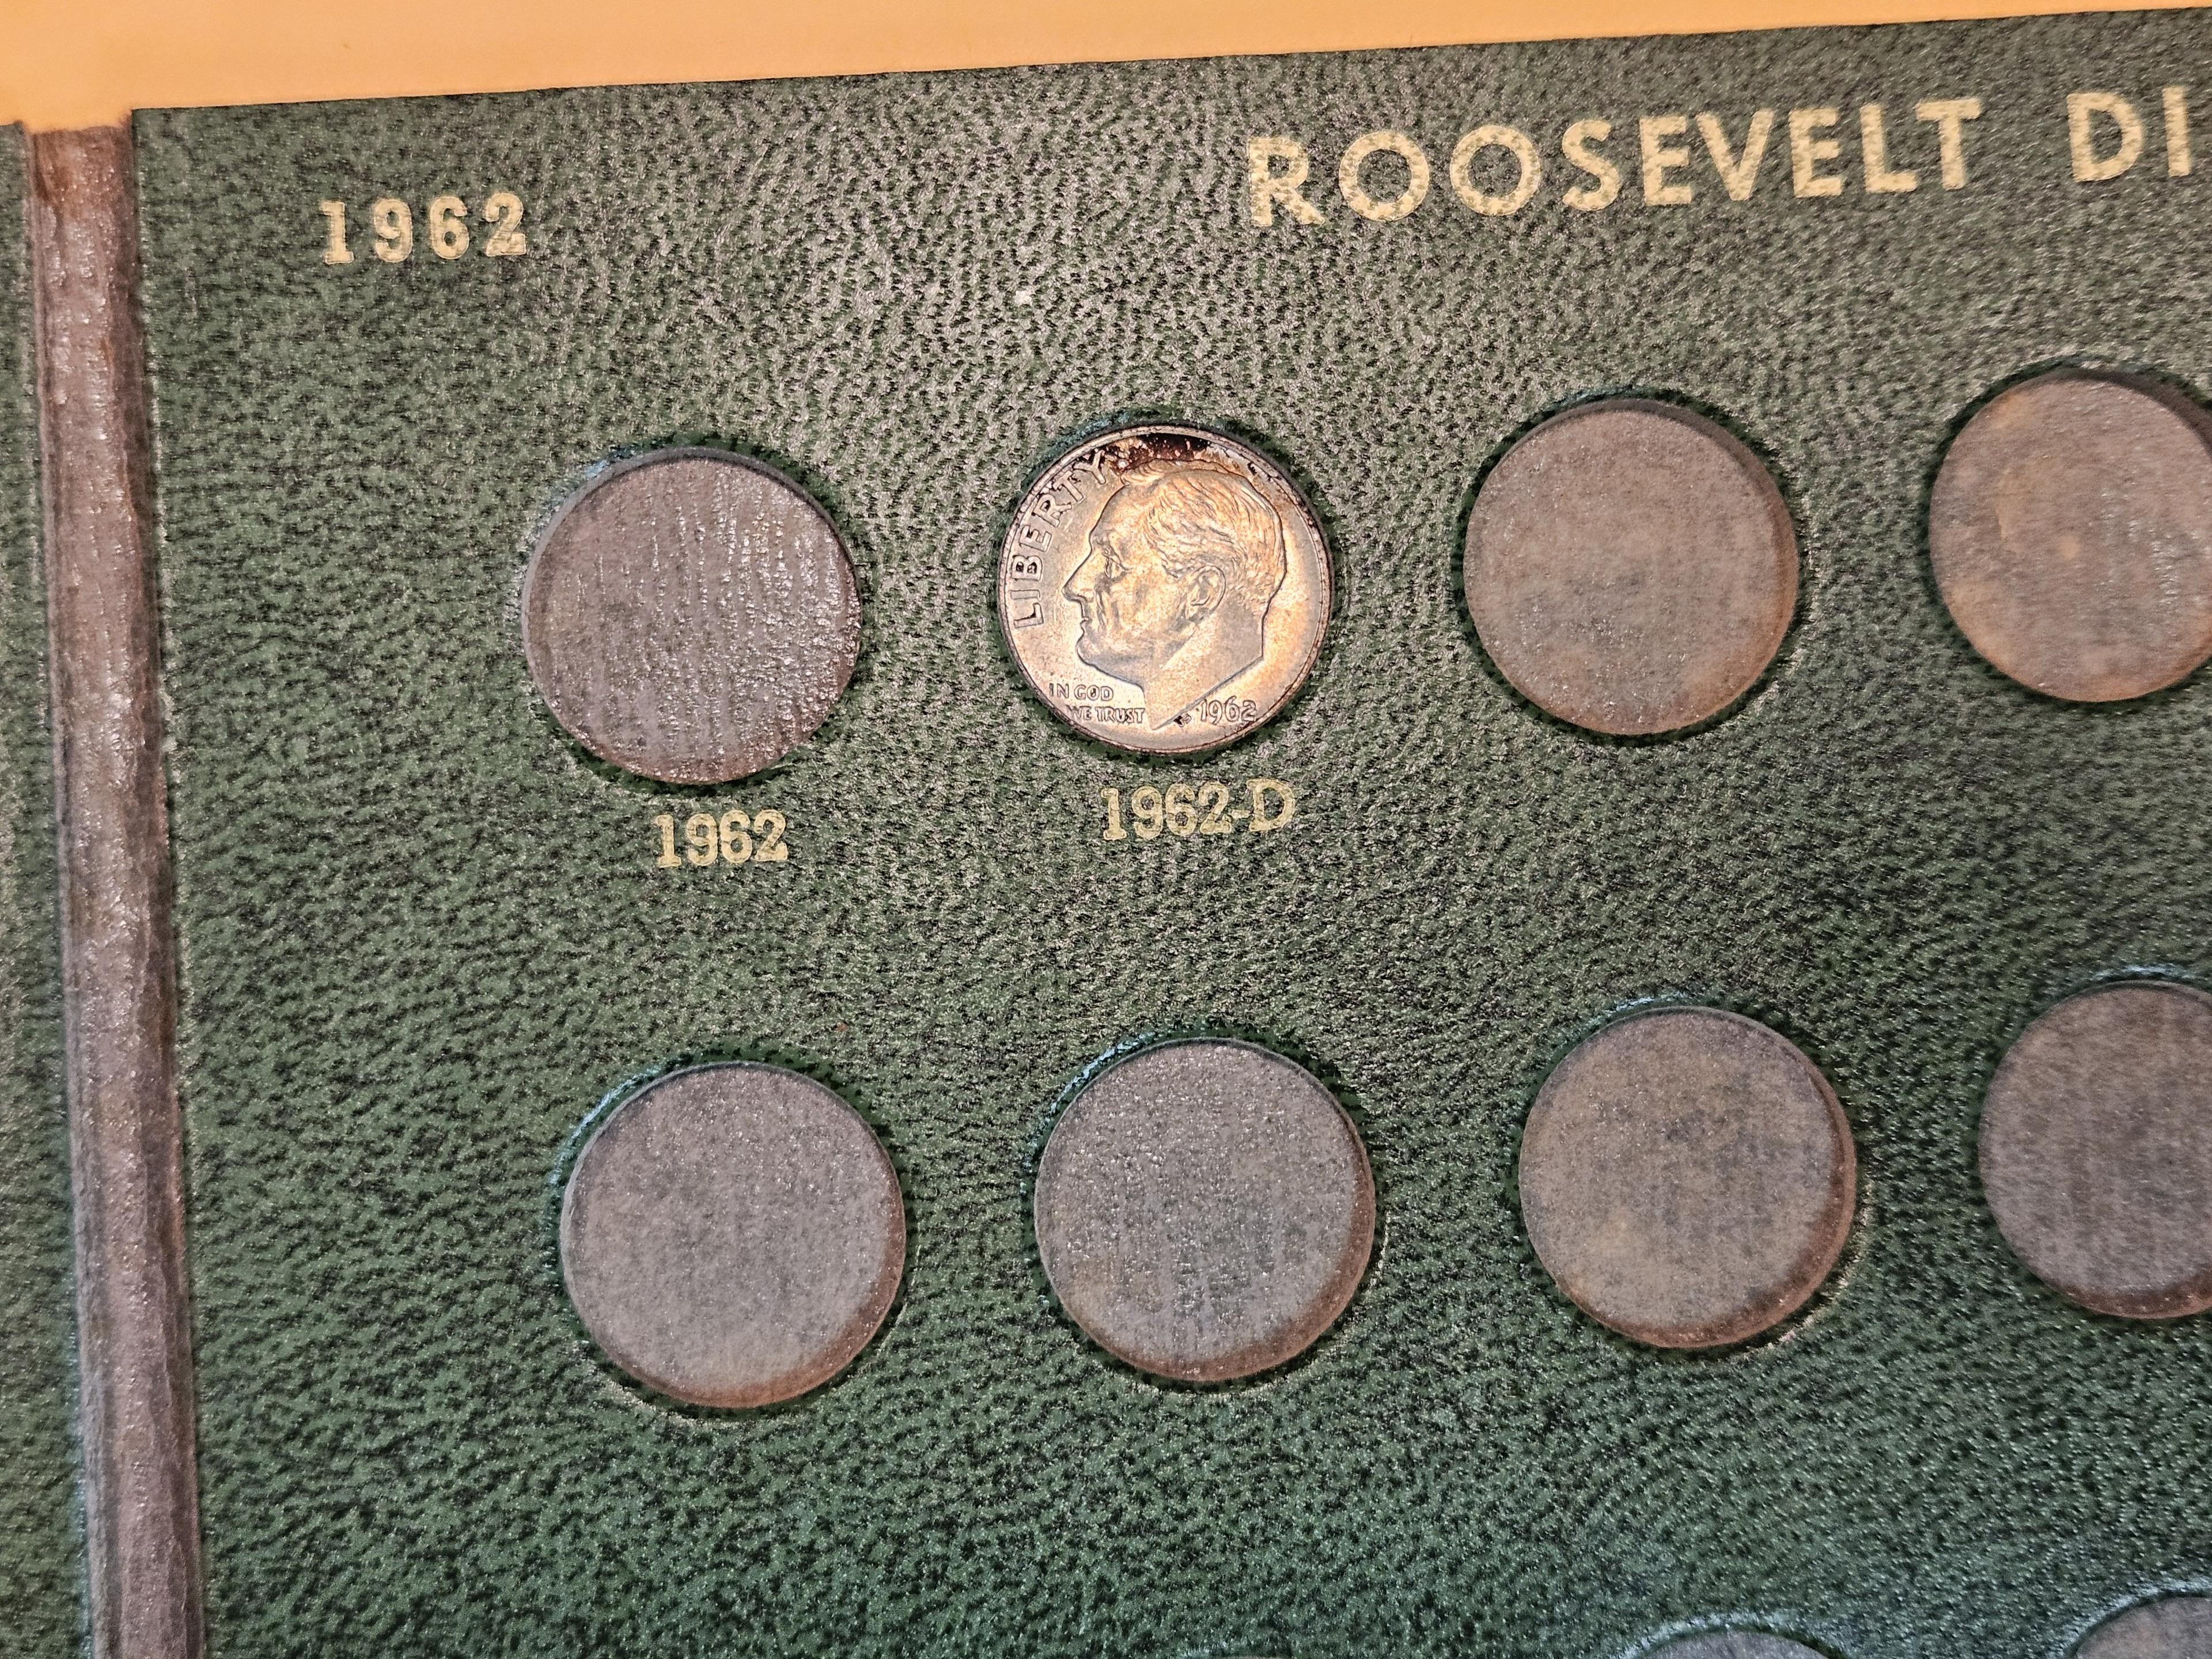 Huge! Almost complete Silver Dime collection